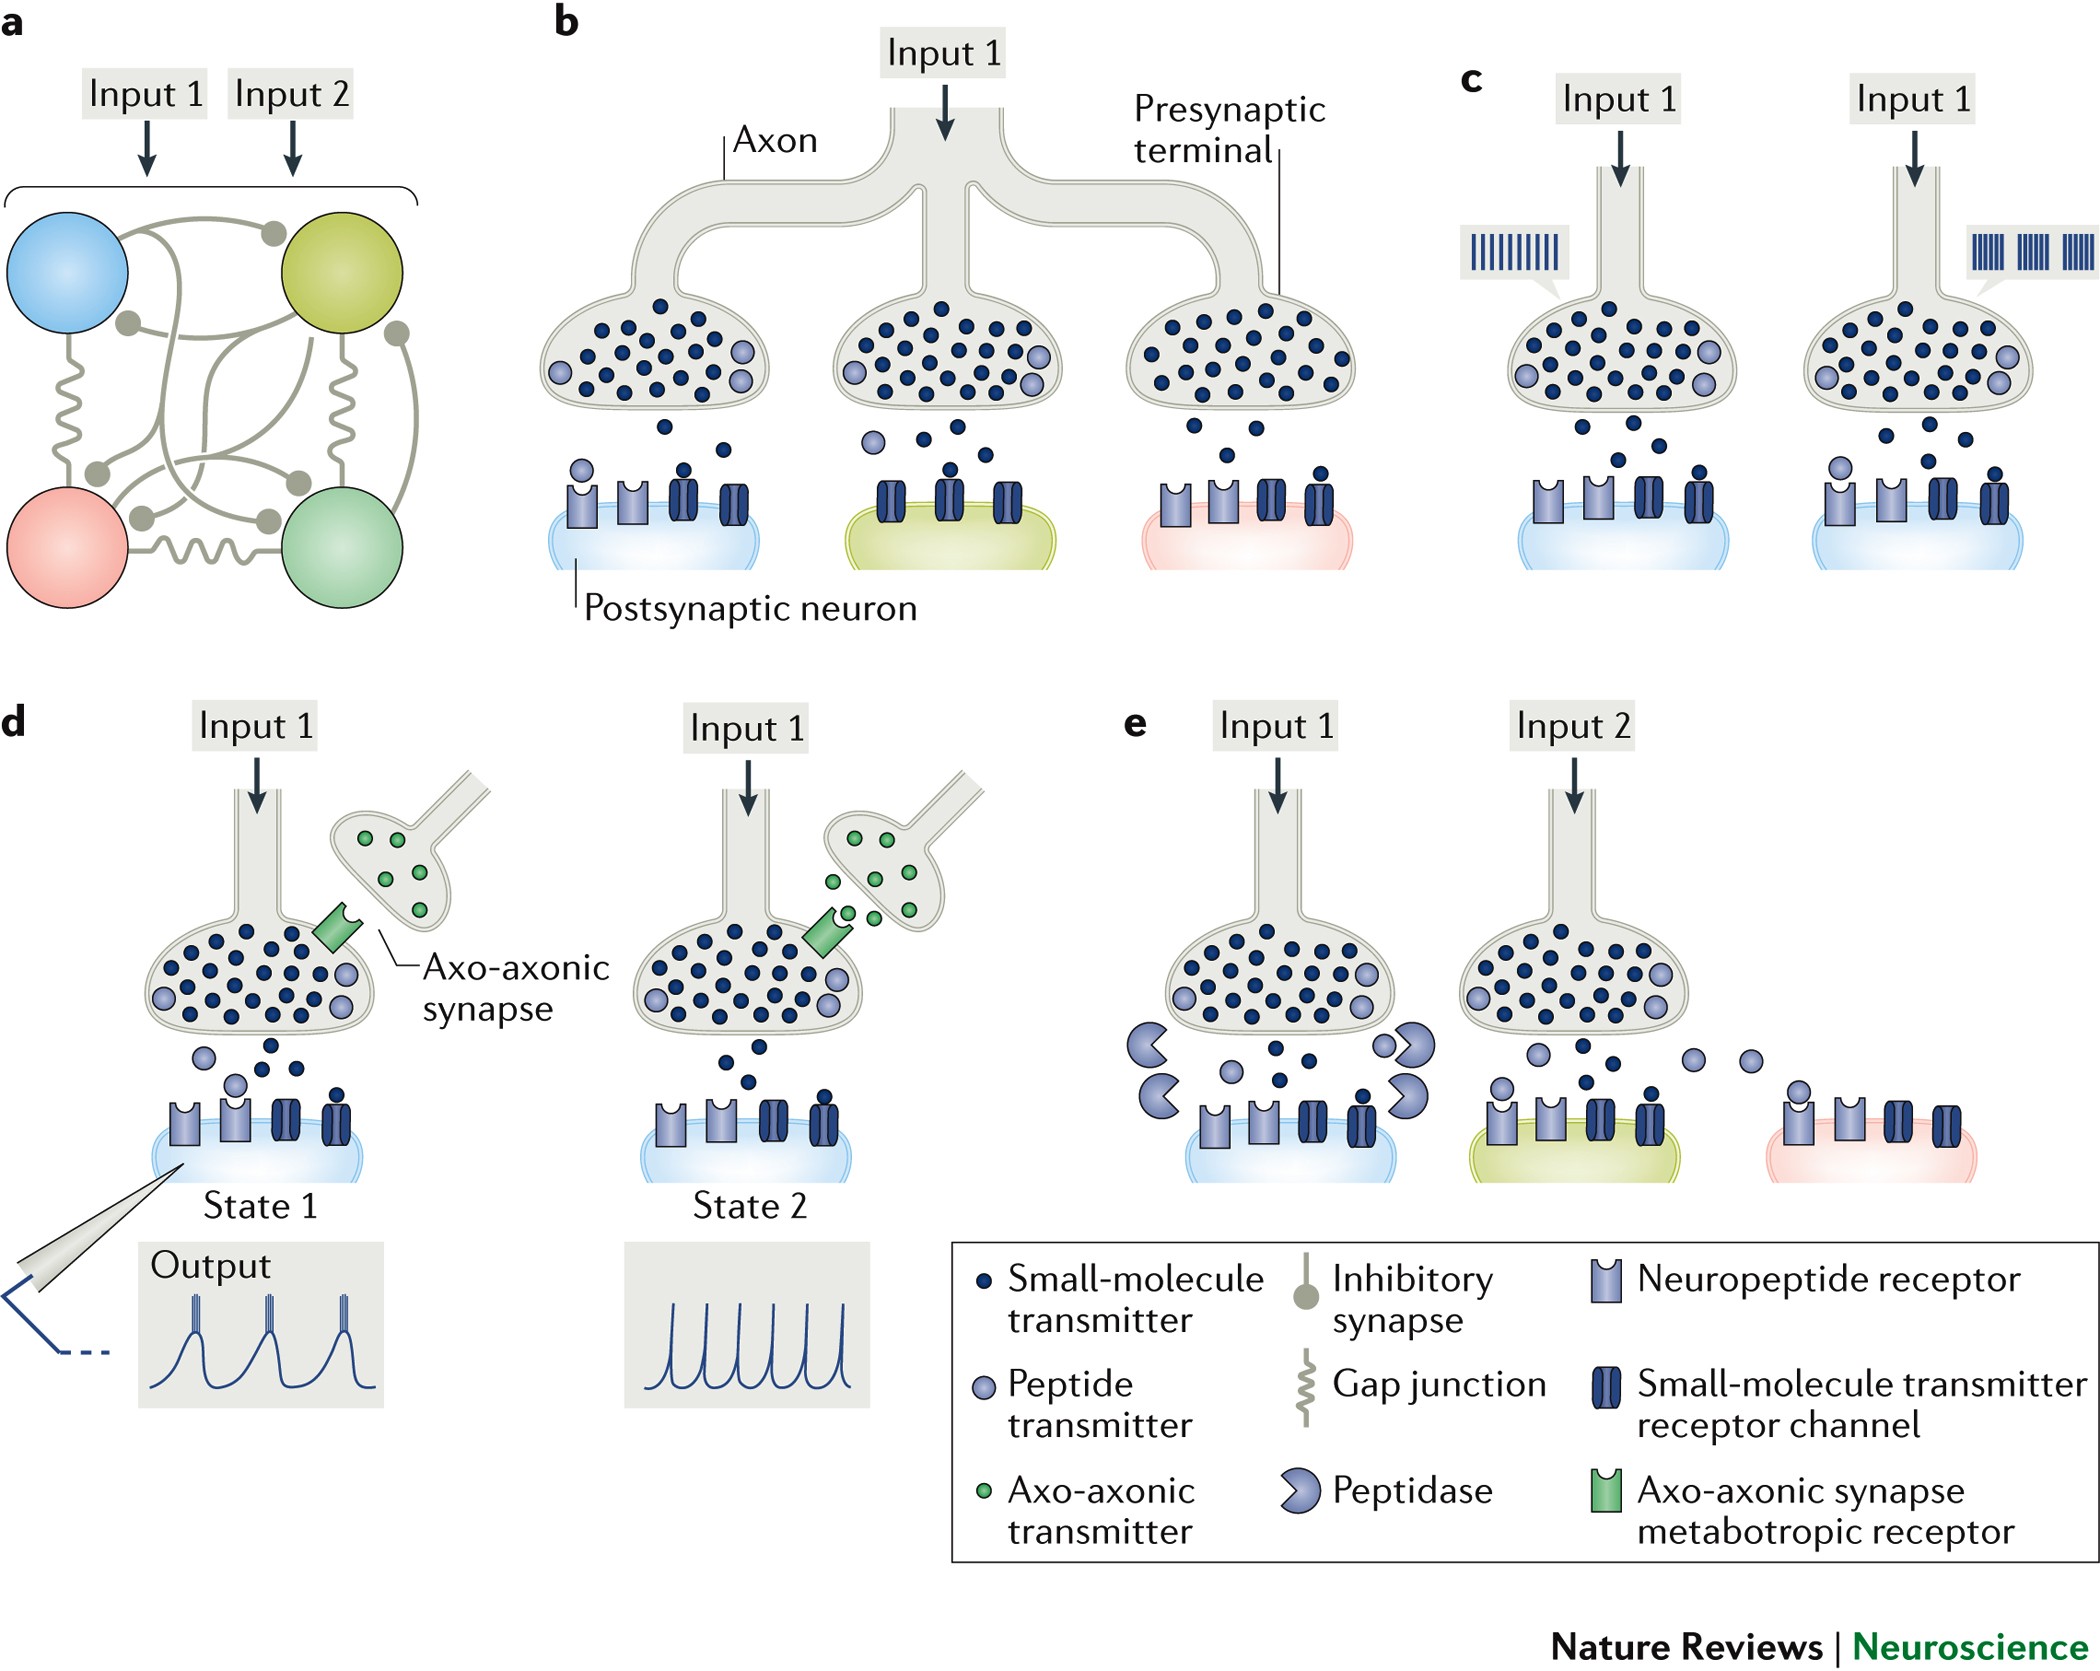 Functional consequences of neuropeptide and small-molecule co-transmission  | Nature Reviews Neuroscience